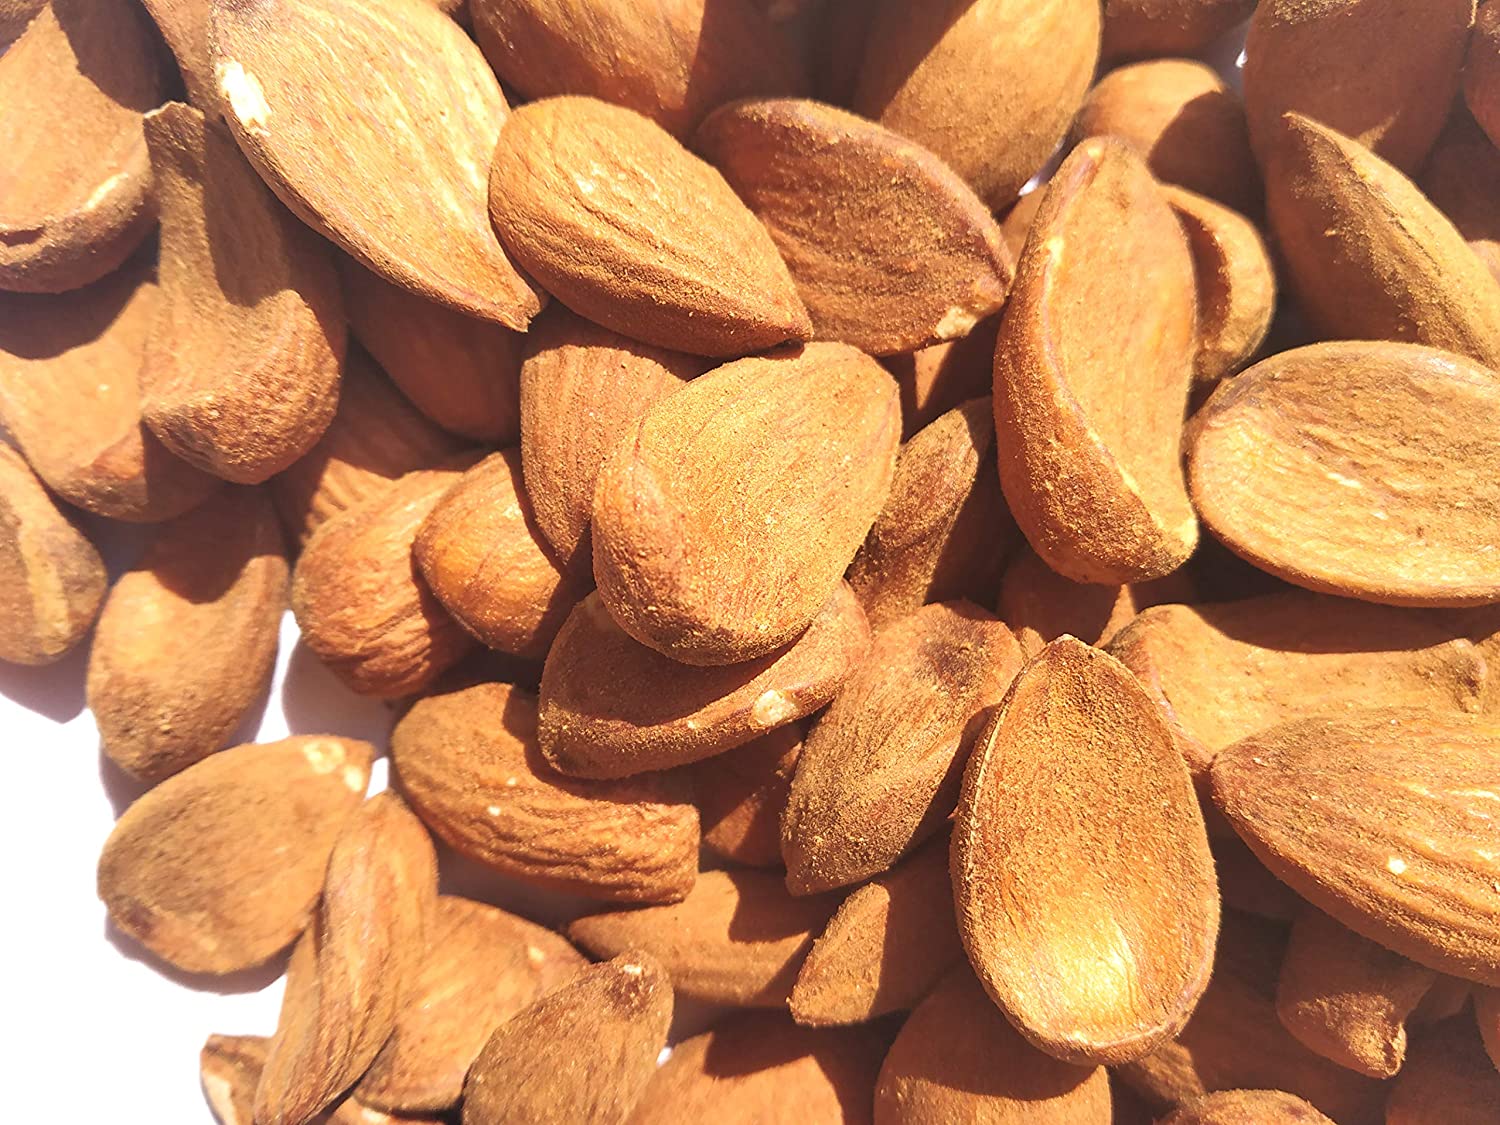 Sale of Mamra almonds | Mamra almonds are one of the unique varieties of Iranian almonds